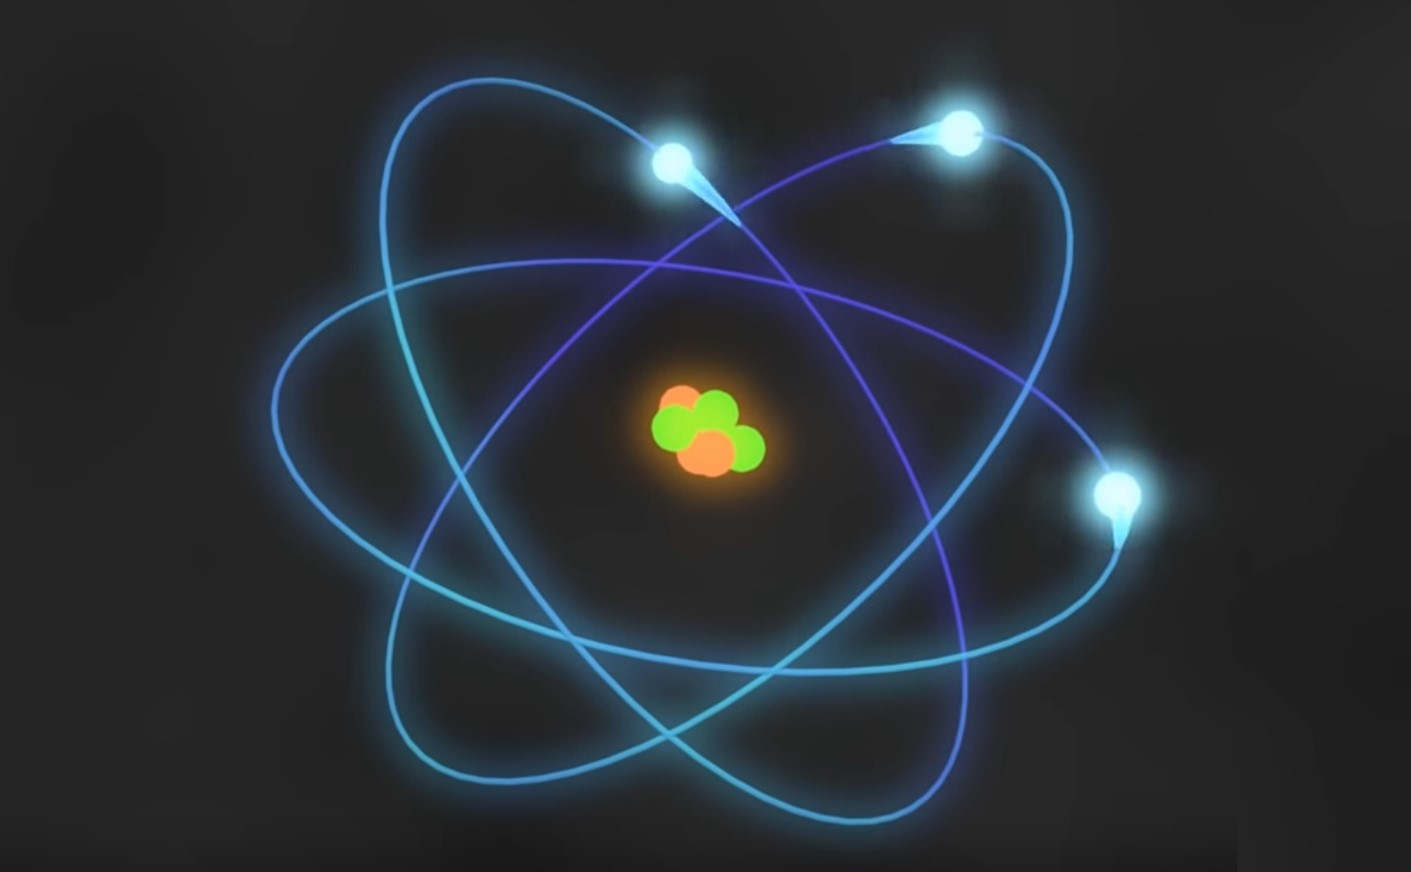 How Small is an Atom